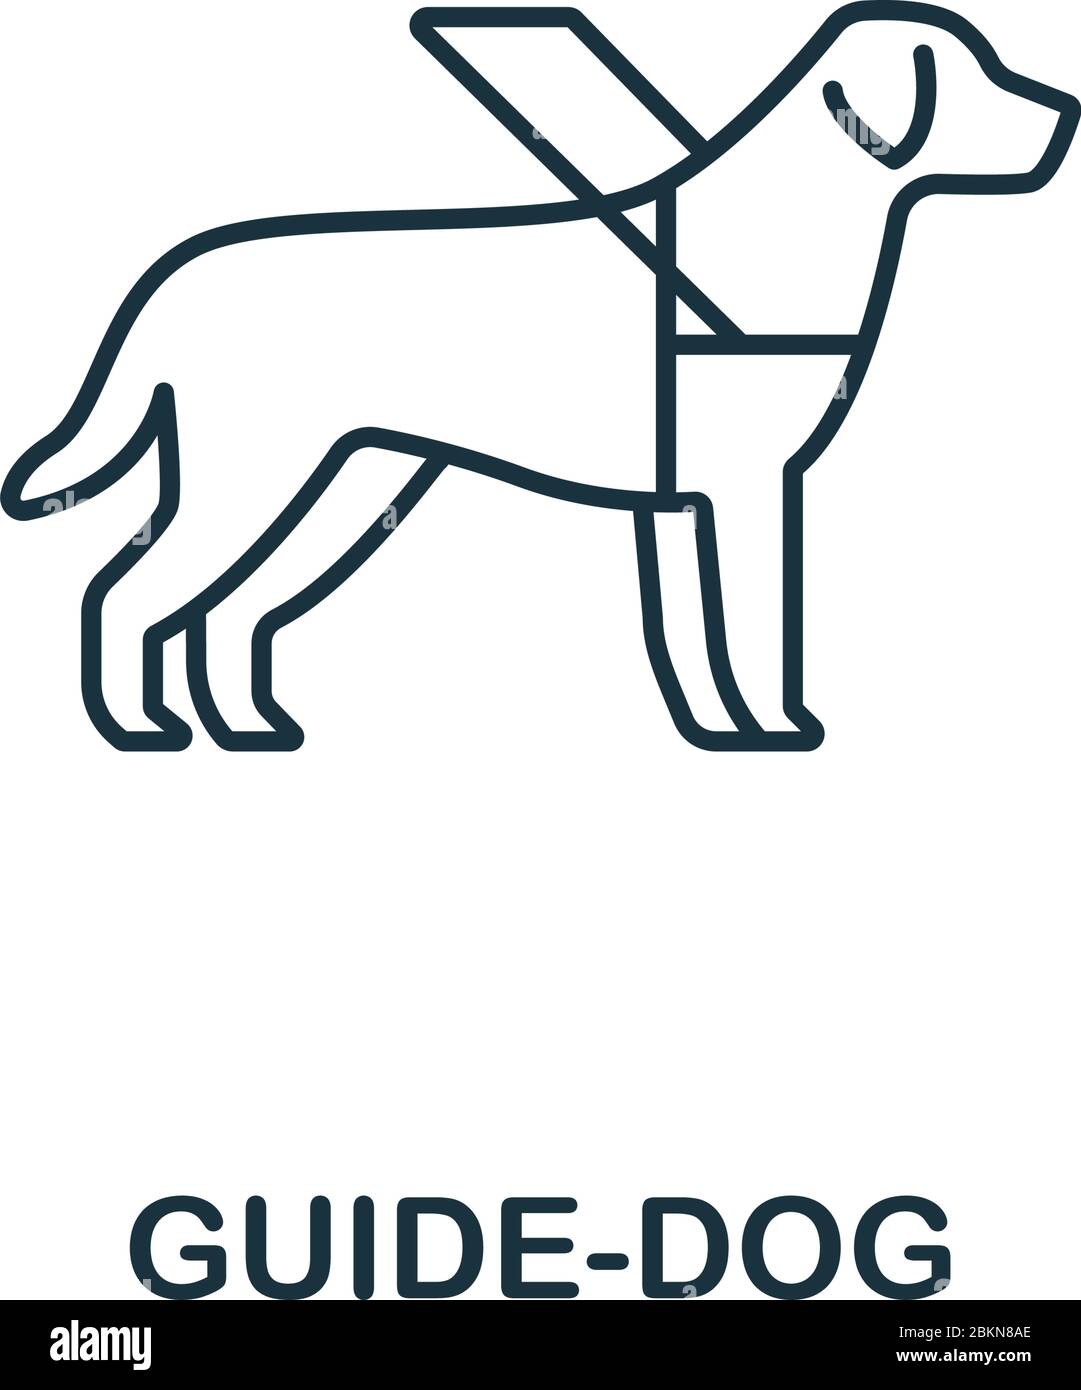 Guide-Dog icon. Simple line element Guide-Dog symbol for templates, web design and infographics Stock Vector